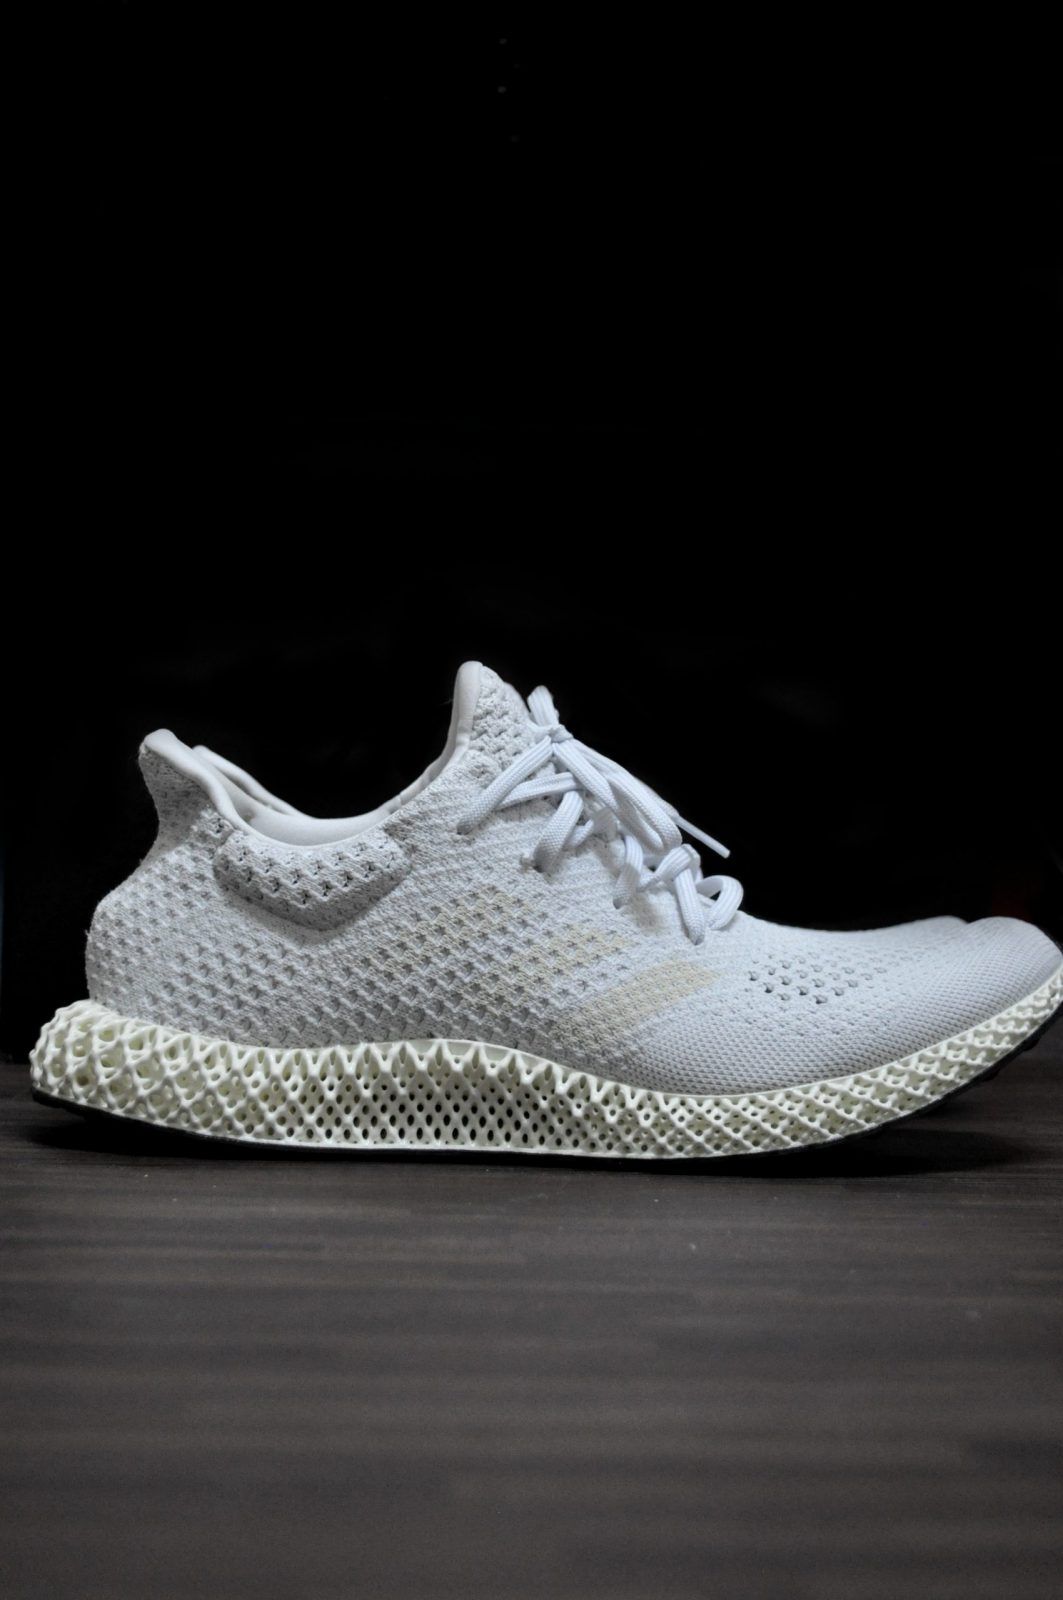 WOMFT? Review: Adidas Futurecraft 4D White" - WOMFT? - What's On Feet - Blog